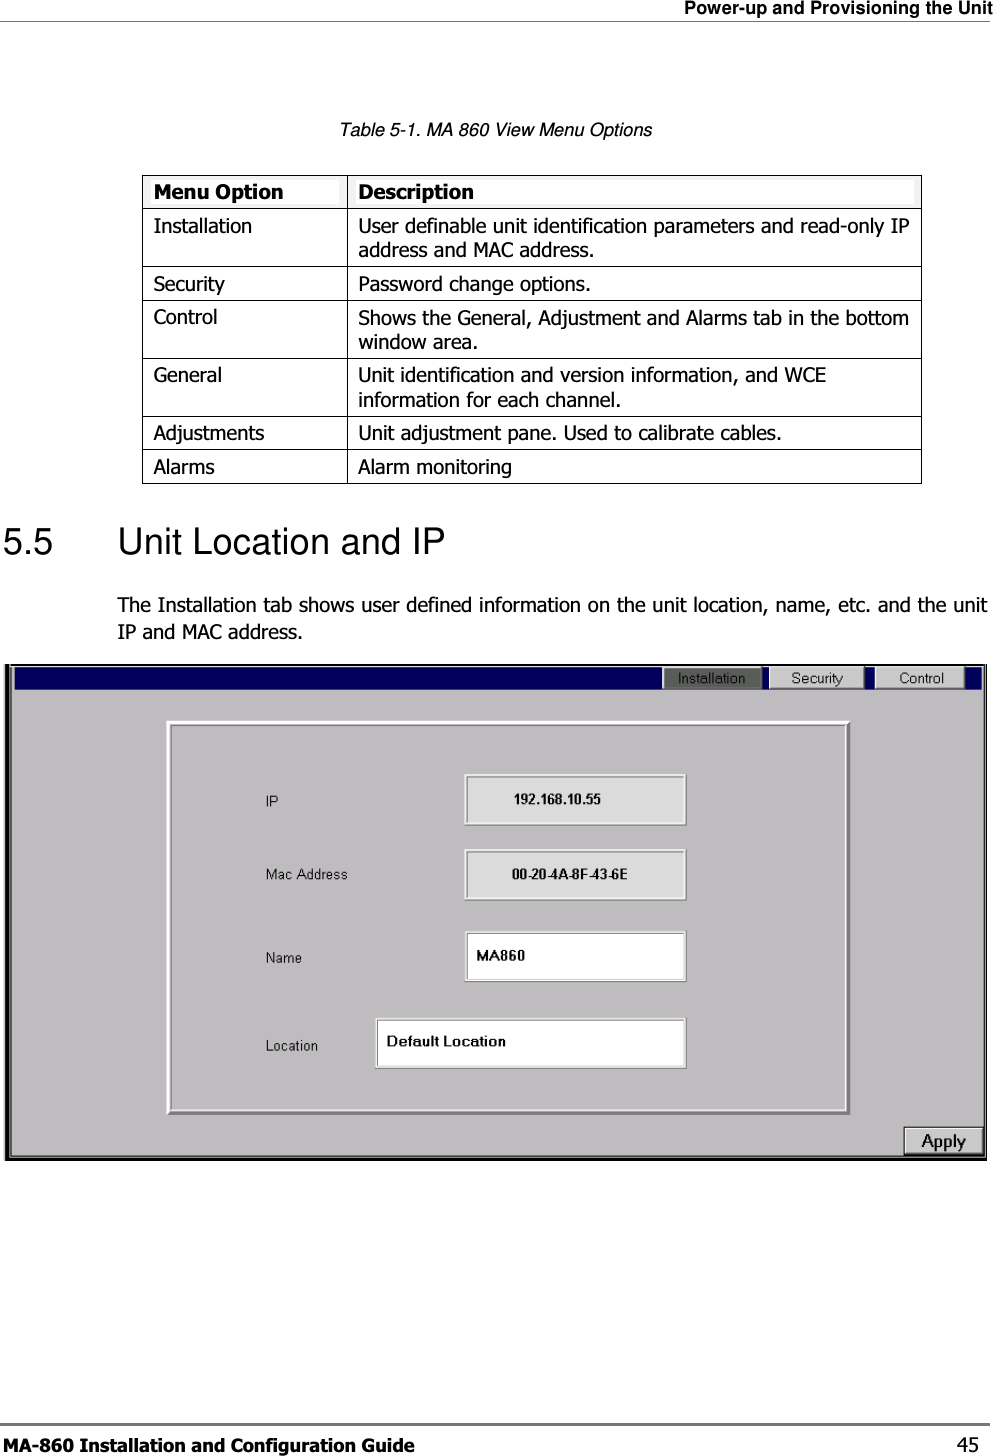 Power-up and Provisioning the Unit MA-860 Installation and Configuration Guide    45  Table  5-1. MA 860 View Menu Options  Menu Option  Description Installation User definable unit identification parameters and read-only IP address and MAC address.Security Password change options.Control Shows the General, Adjustment and Alarms tab in the bottom window area.General  Unit identification and version information, and WCE information for each channel. Adjustments Unit adjustment pane. Used to calibrate cables.Alarms  Alarm monitoring 5.5  Unit Location and IP  The Installation tab shows user defined information on the unit location, name, etc. and the unit IP and MAC address.    